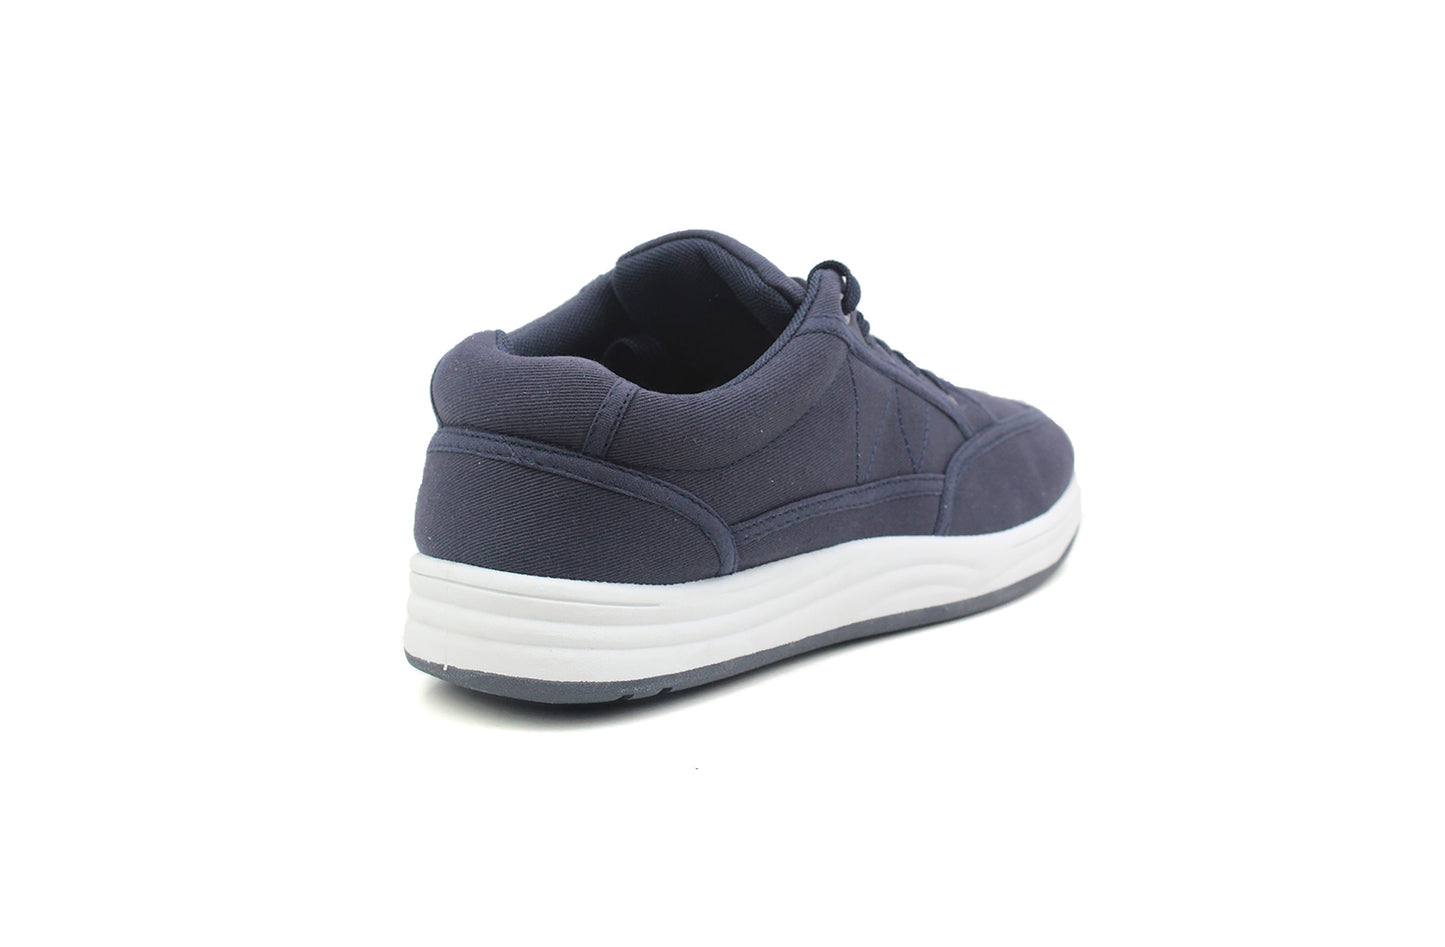 Mens Navy Blue Casual Canvas Lace Up Skate Sneaker Pumps Trainers